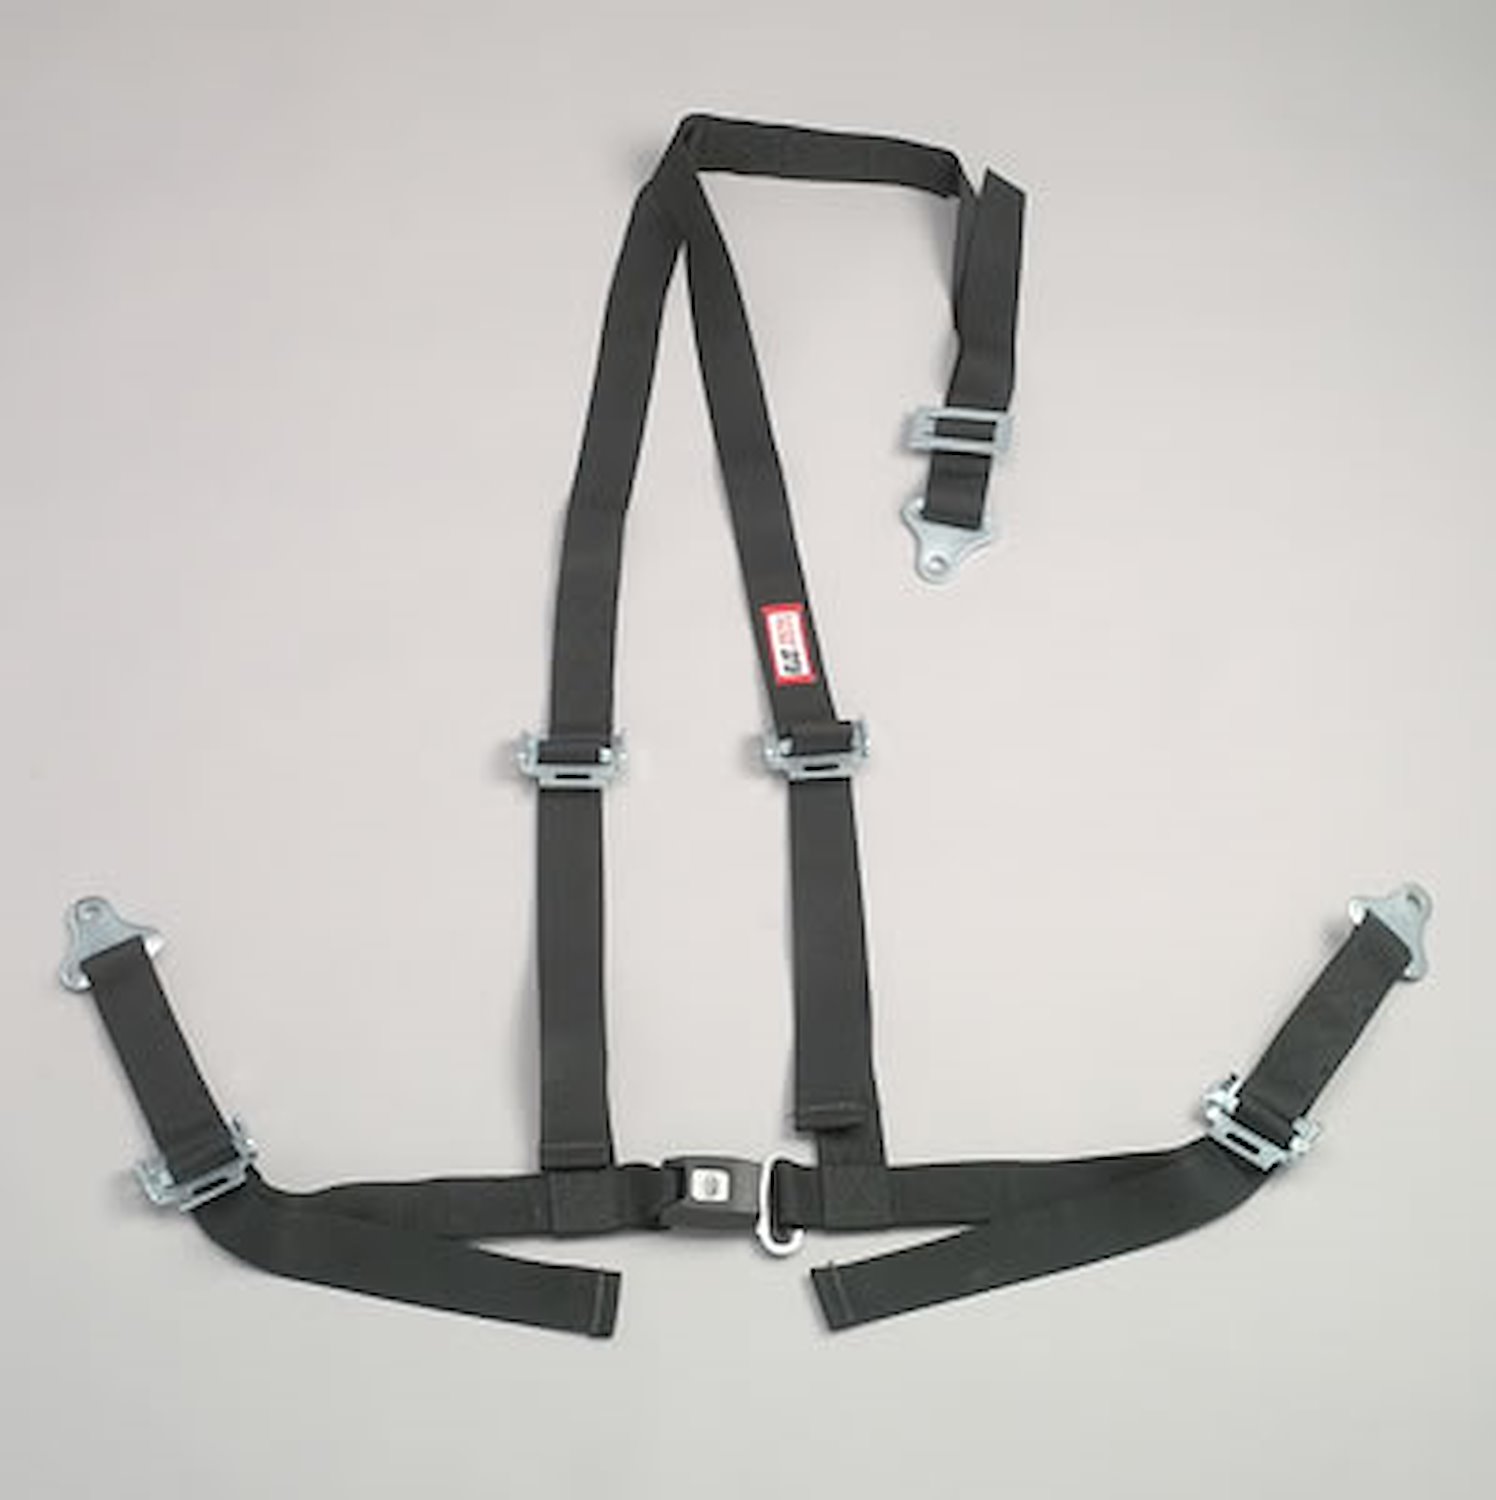 NON-SFI B&T HARNESS 2 PULL UP Lap Belt 2 S. H. Individual FLOOR Mount ALL WRAP ENDS w/STERNUM STRAP RED